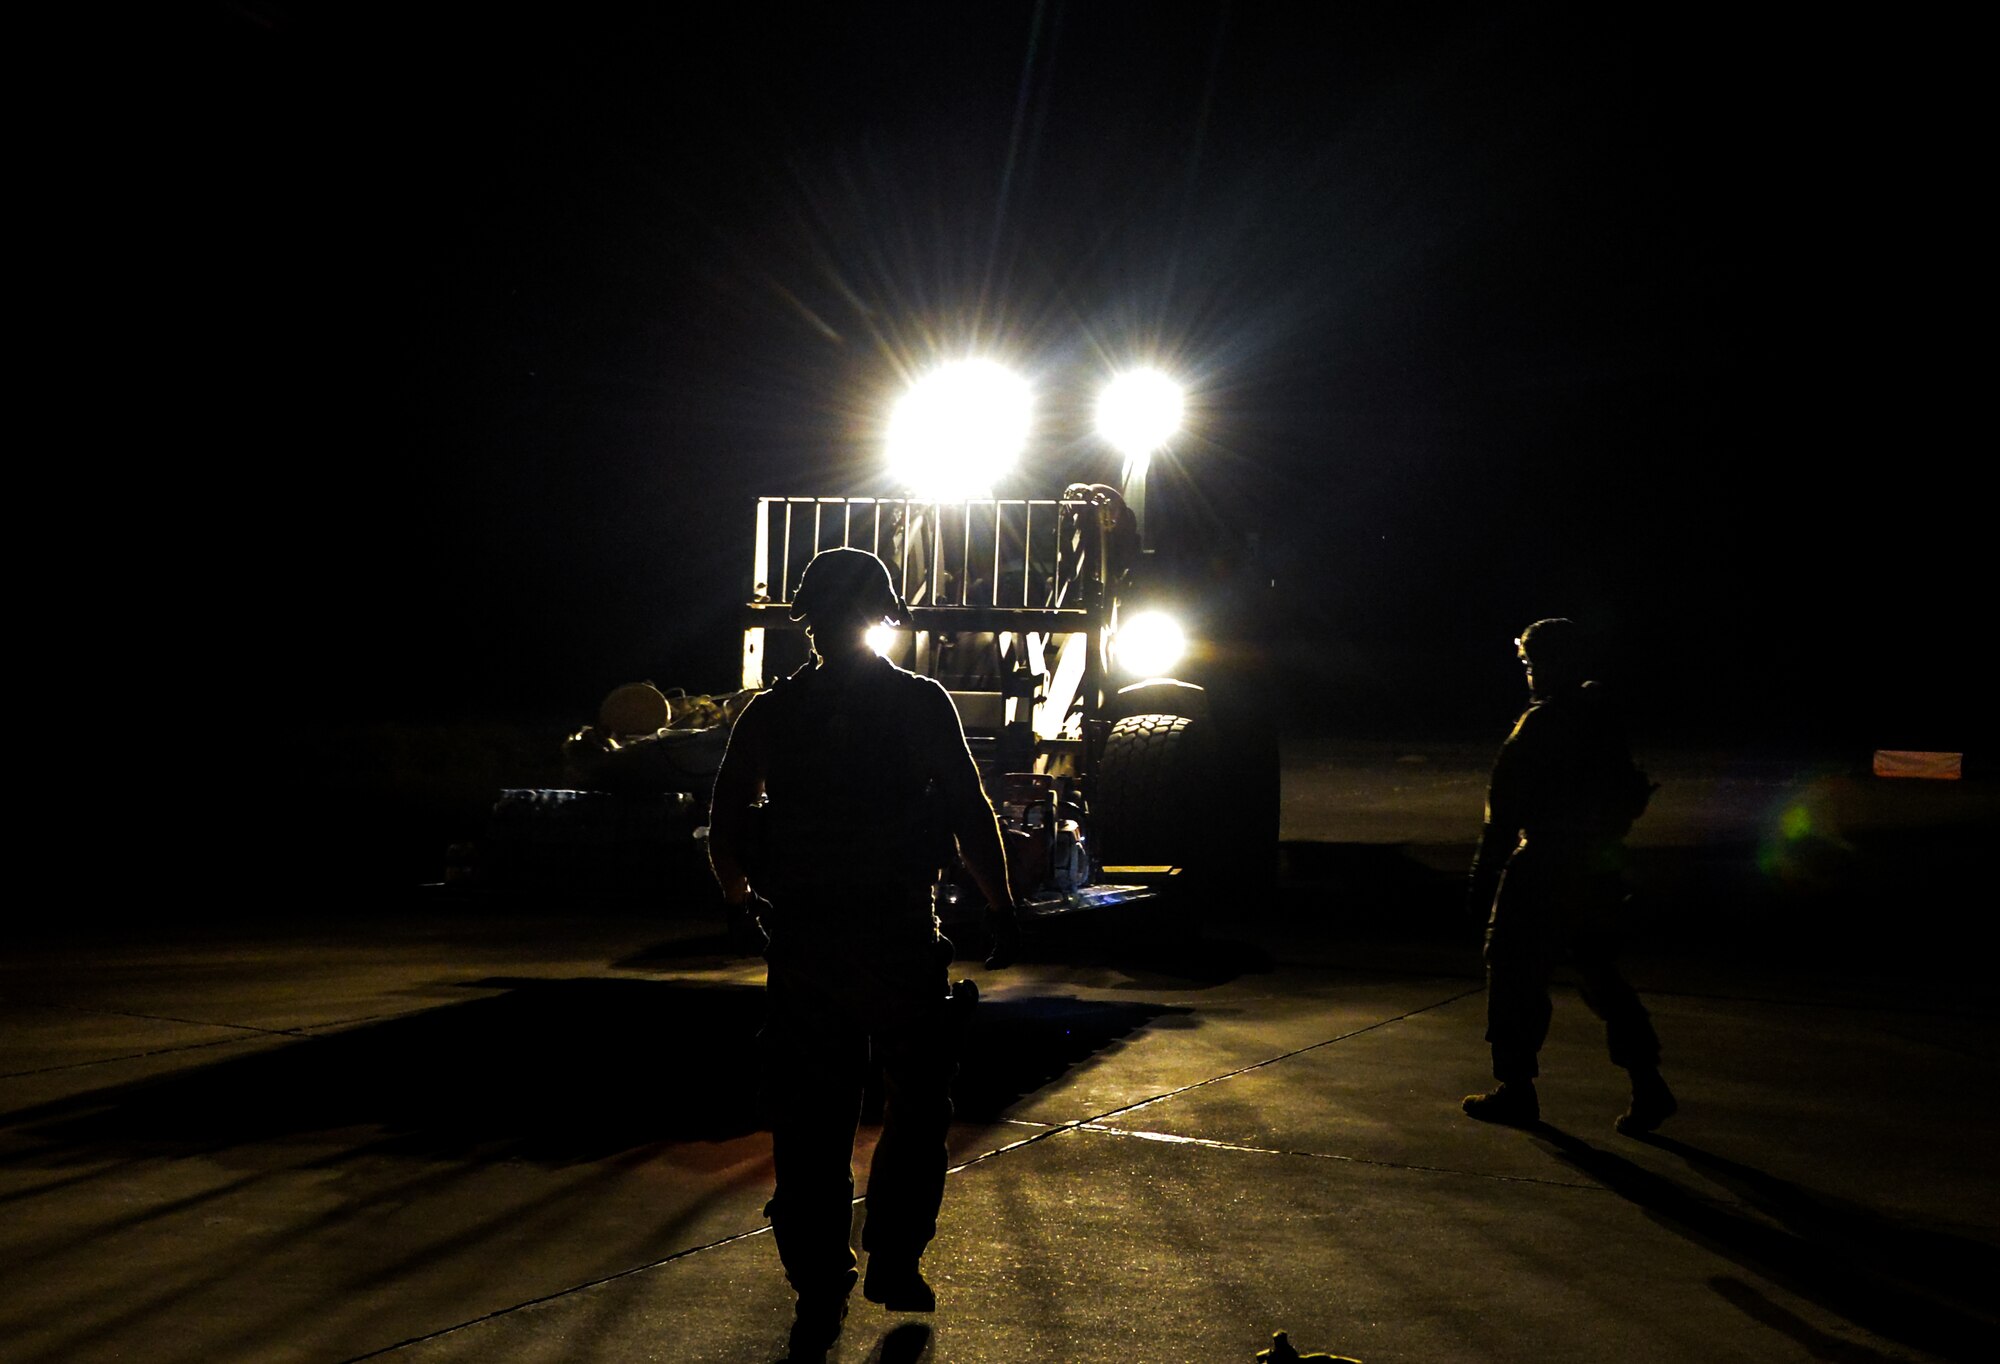 Members of the 1st Expeditionary Civil Engineer Group assemble supplies before repairing the flightline at Qayyarah West Airfield May 16, 2017. Qayyarah West is an airfield in northern Iraq’s Ninawa Province and serves as the logistical hub and strategic launching pad resupplying the frontlines in an attempt to recapture Mosul. (U.S. Air Force photo by Staff Sgt. Michael Battles)